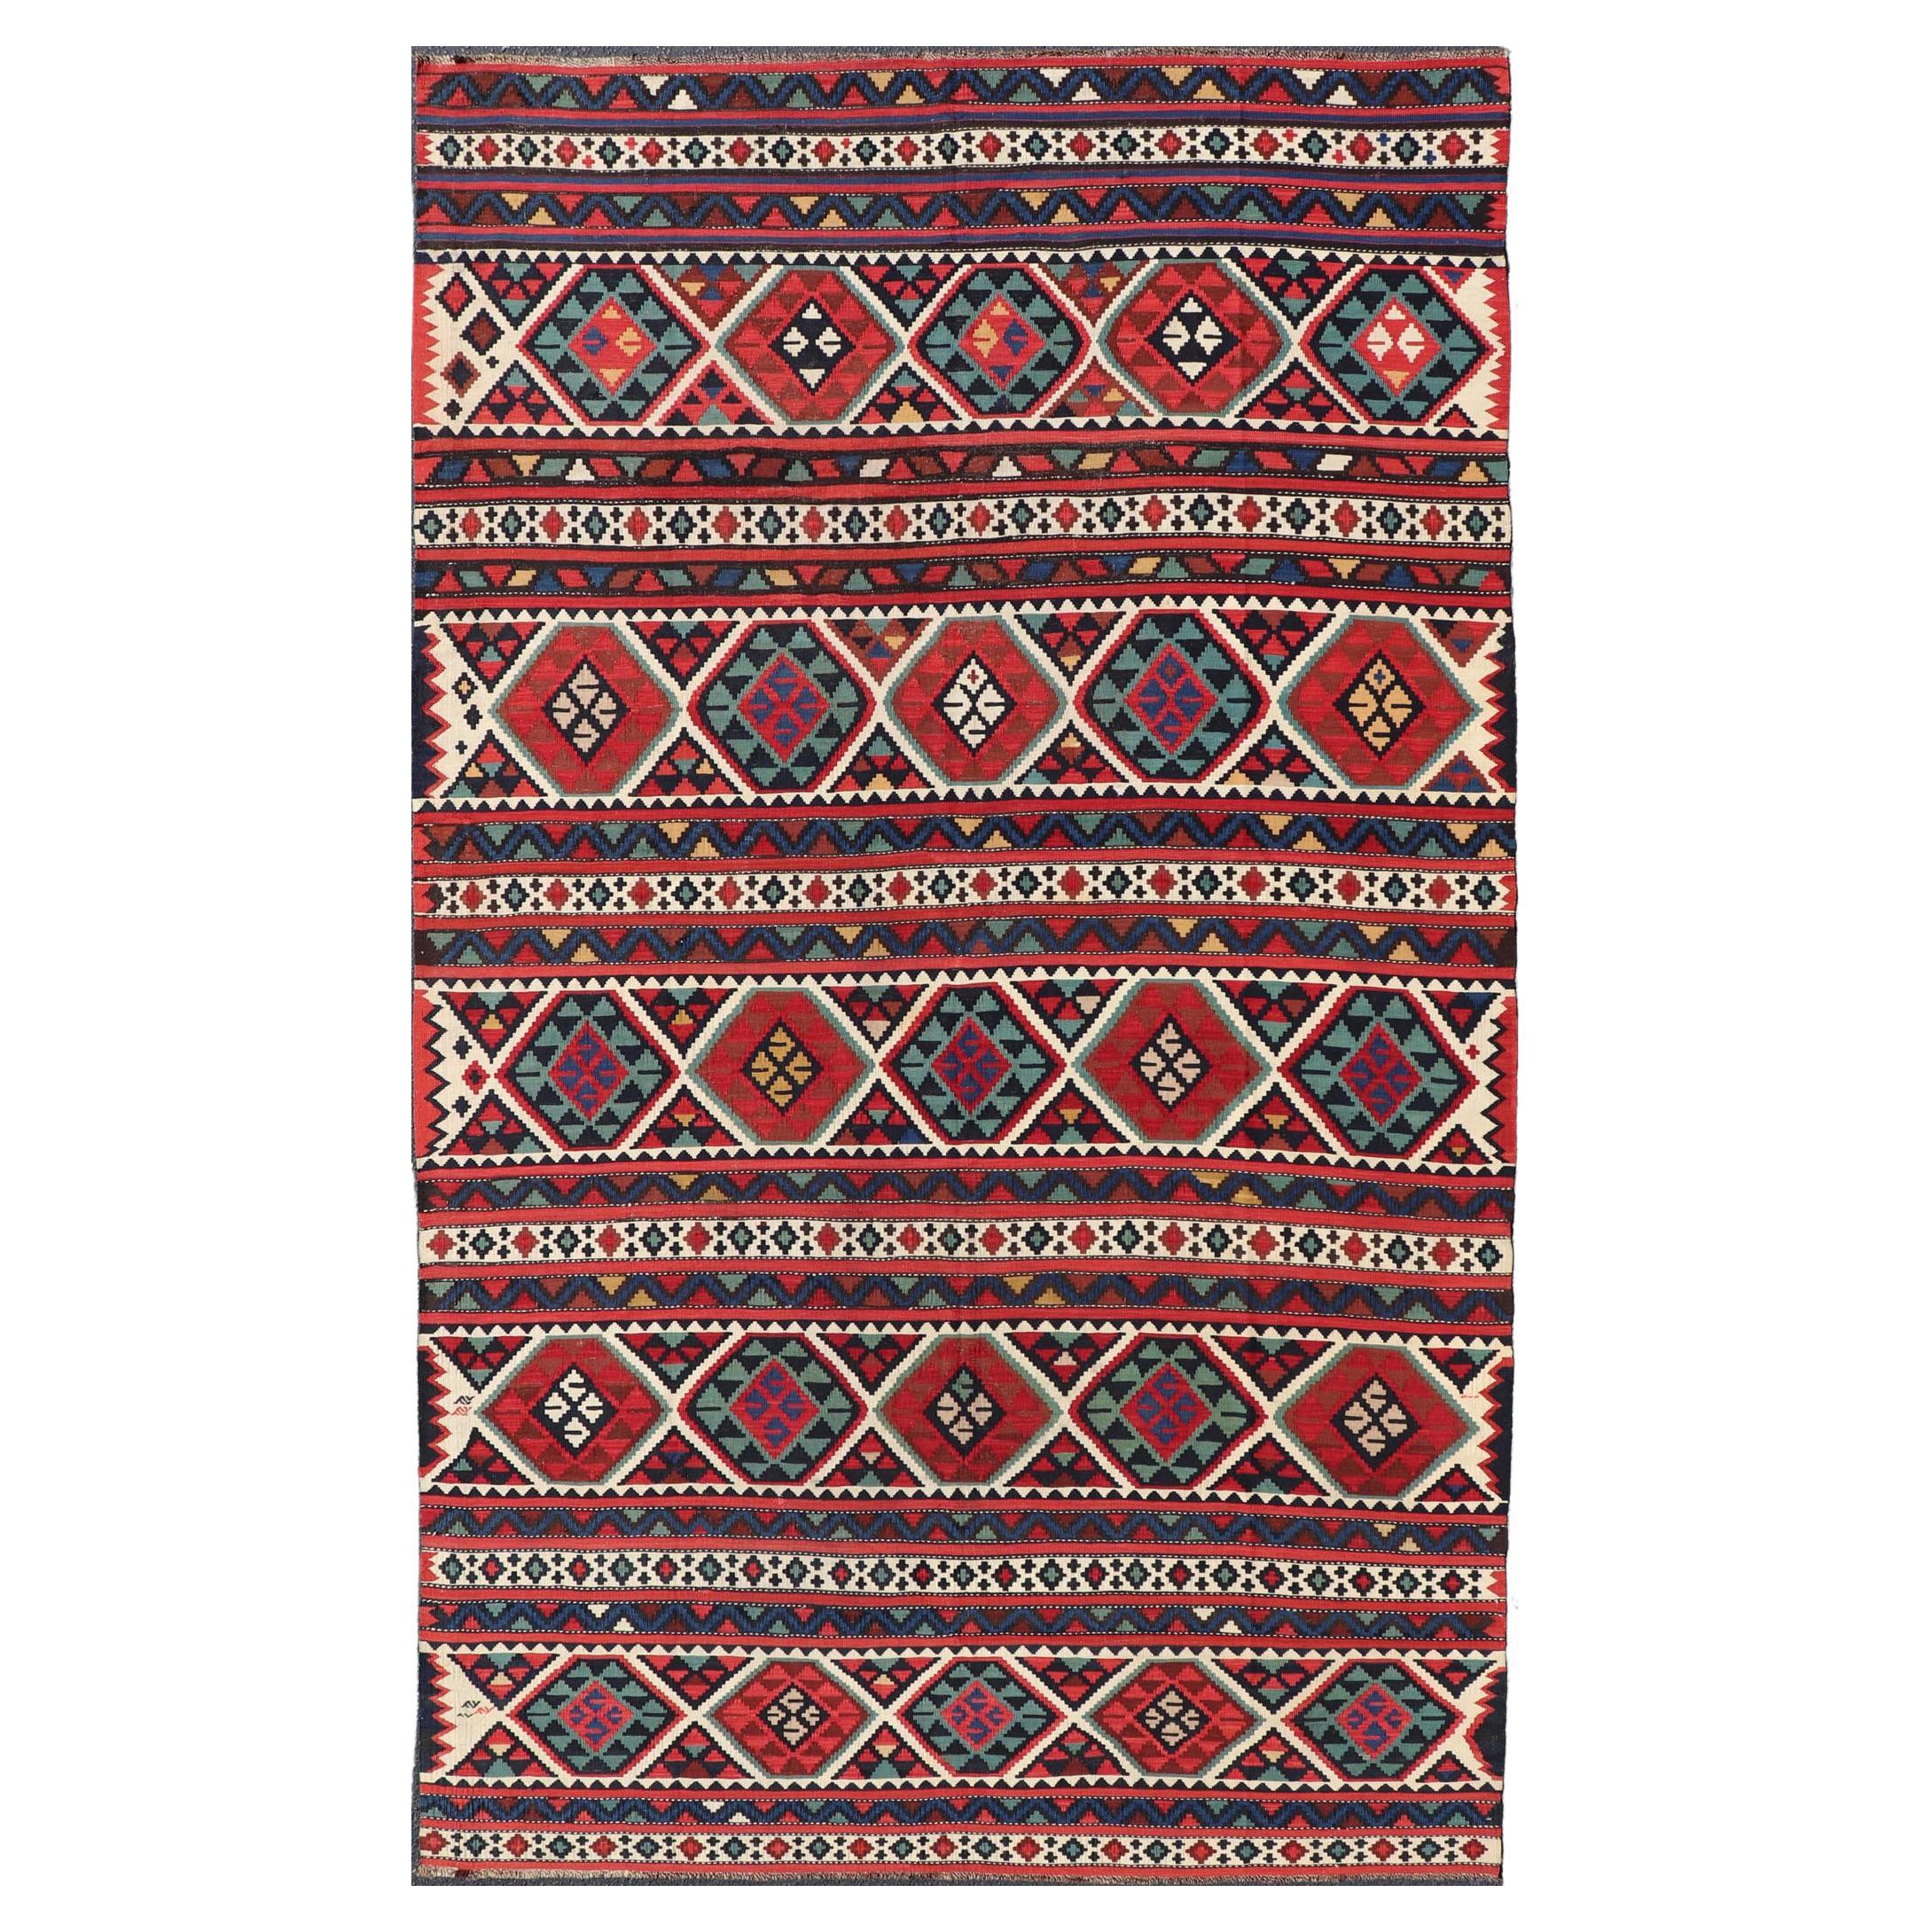 19th Century Antique Shirvan Kilim with Intricate Design in with Vibrant Colors